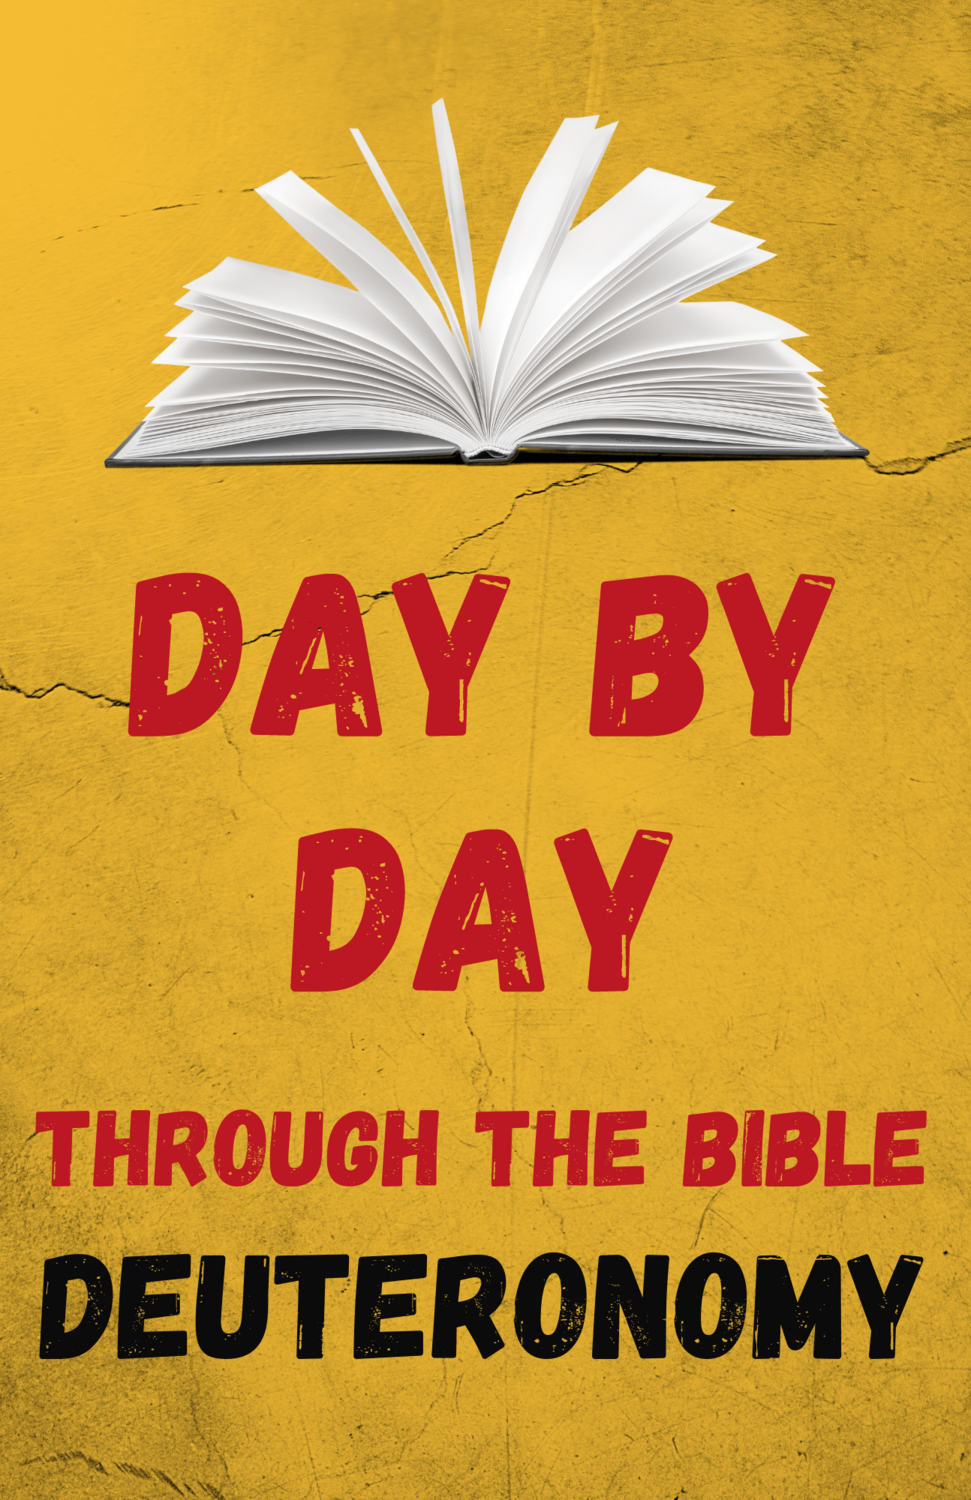 Day By Day Through the Bible: Thirty Days in Deuteronomy - Digital Download